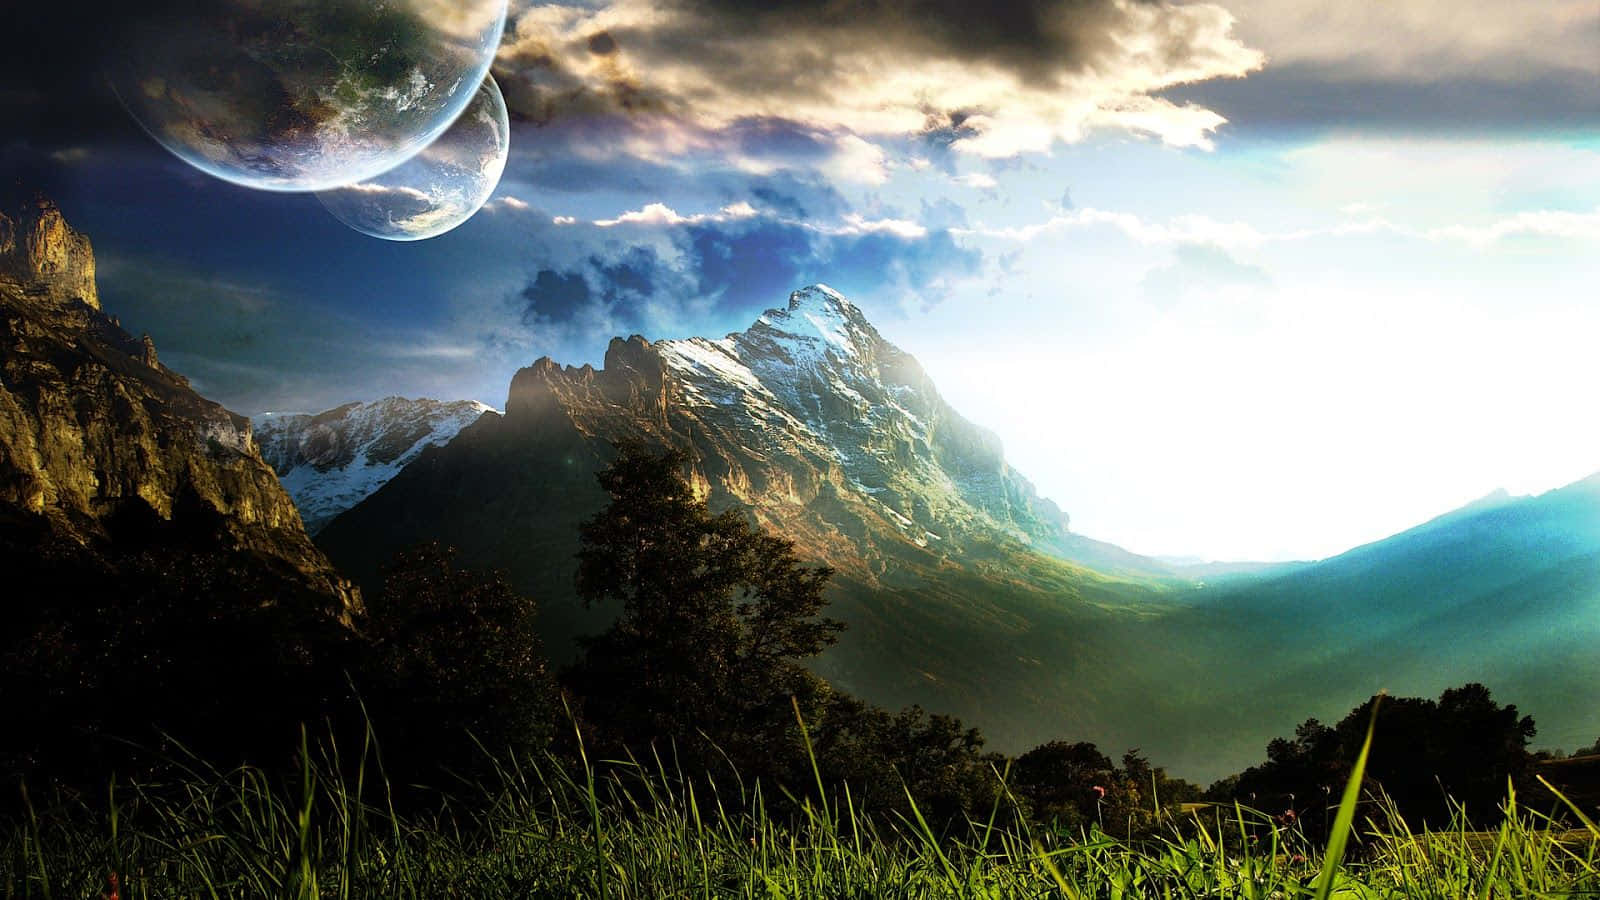 Grassy Plains And Mountain Best Computer Background